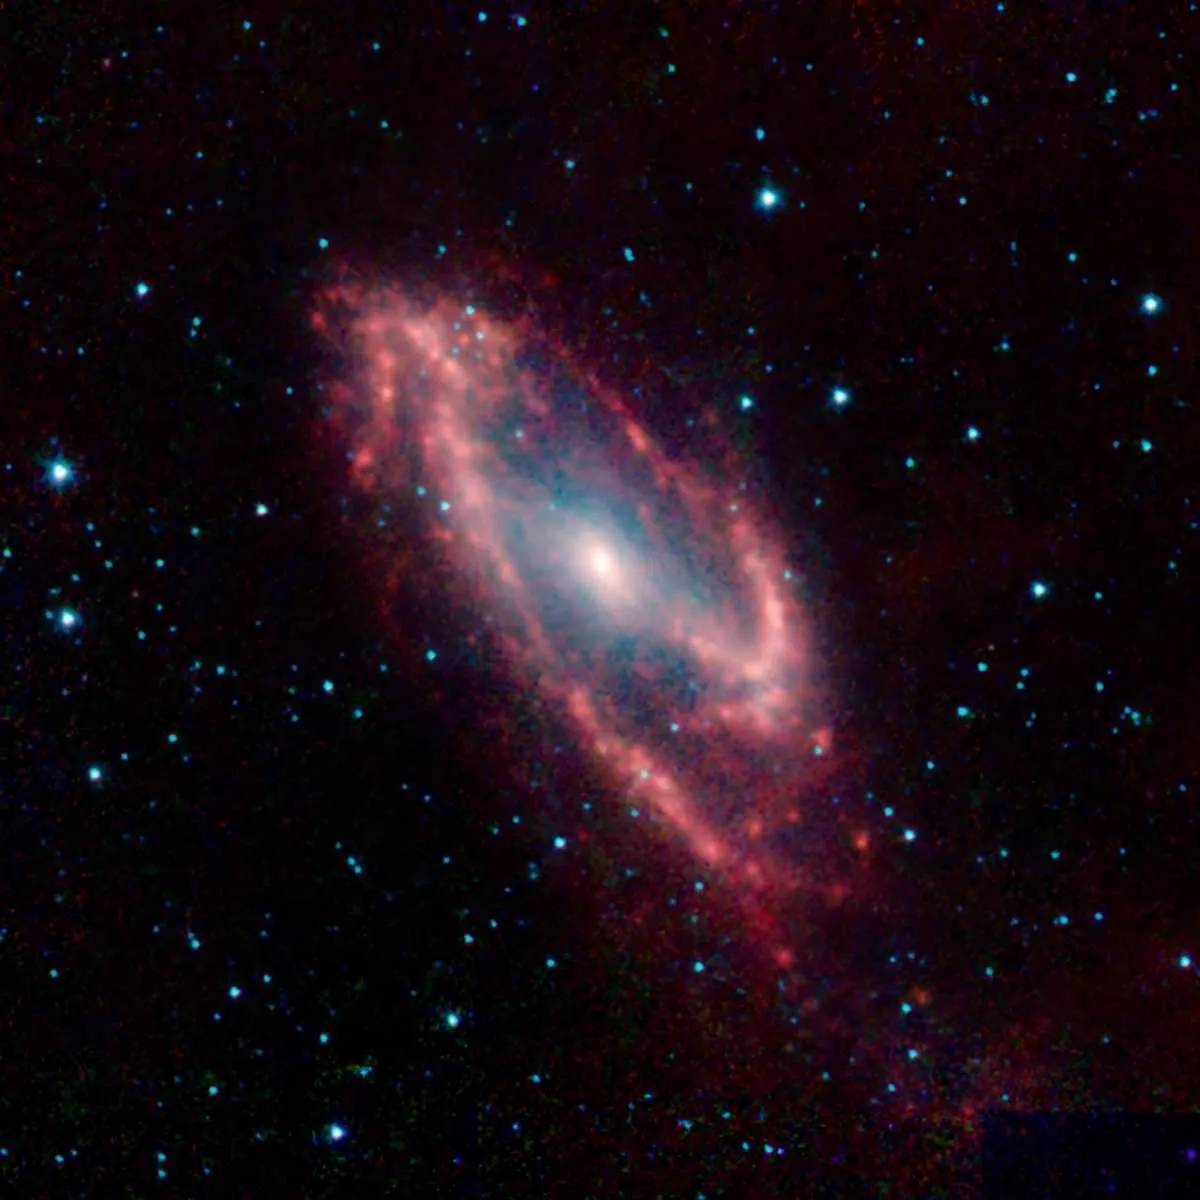 Maffei 2 You'll struggle to see this galaxy with an optical telescope as it is hidden by dust - it's not called the Hidden Galaxy for nothing! To see it in all its magnificence you need to use an infrared camera like the one on the NASA Spitzer Space Telescope. © NASA/JPL-Caltech/UCLA